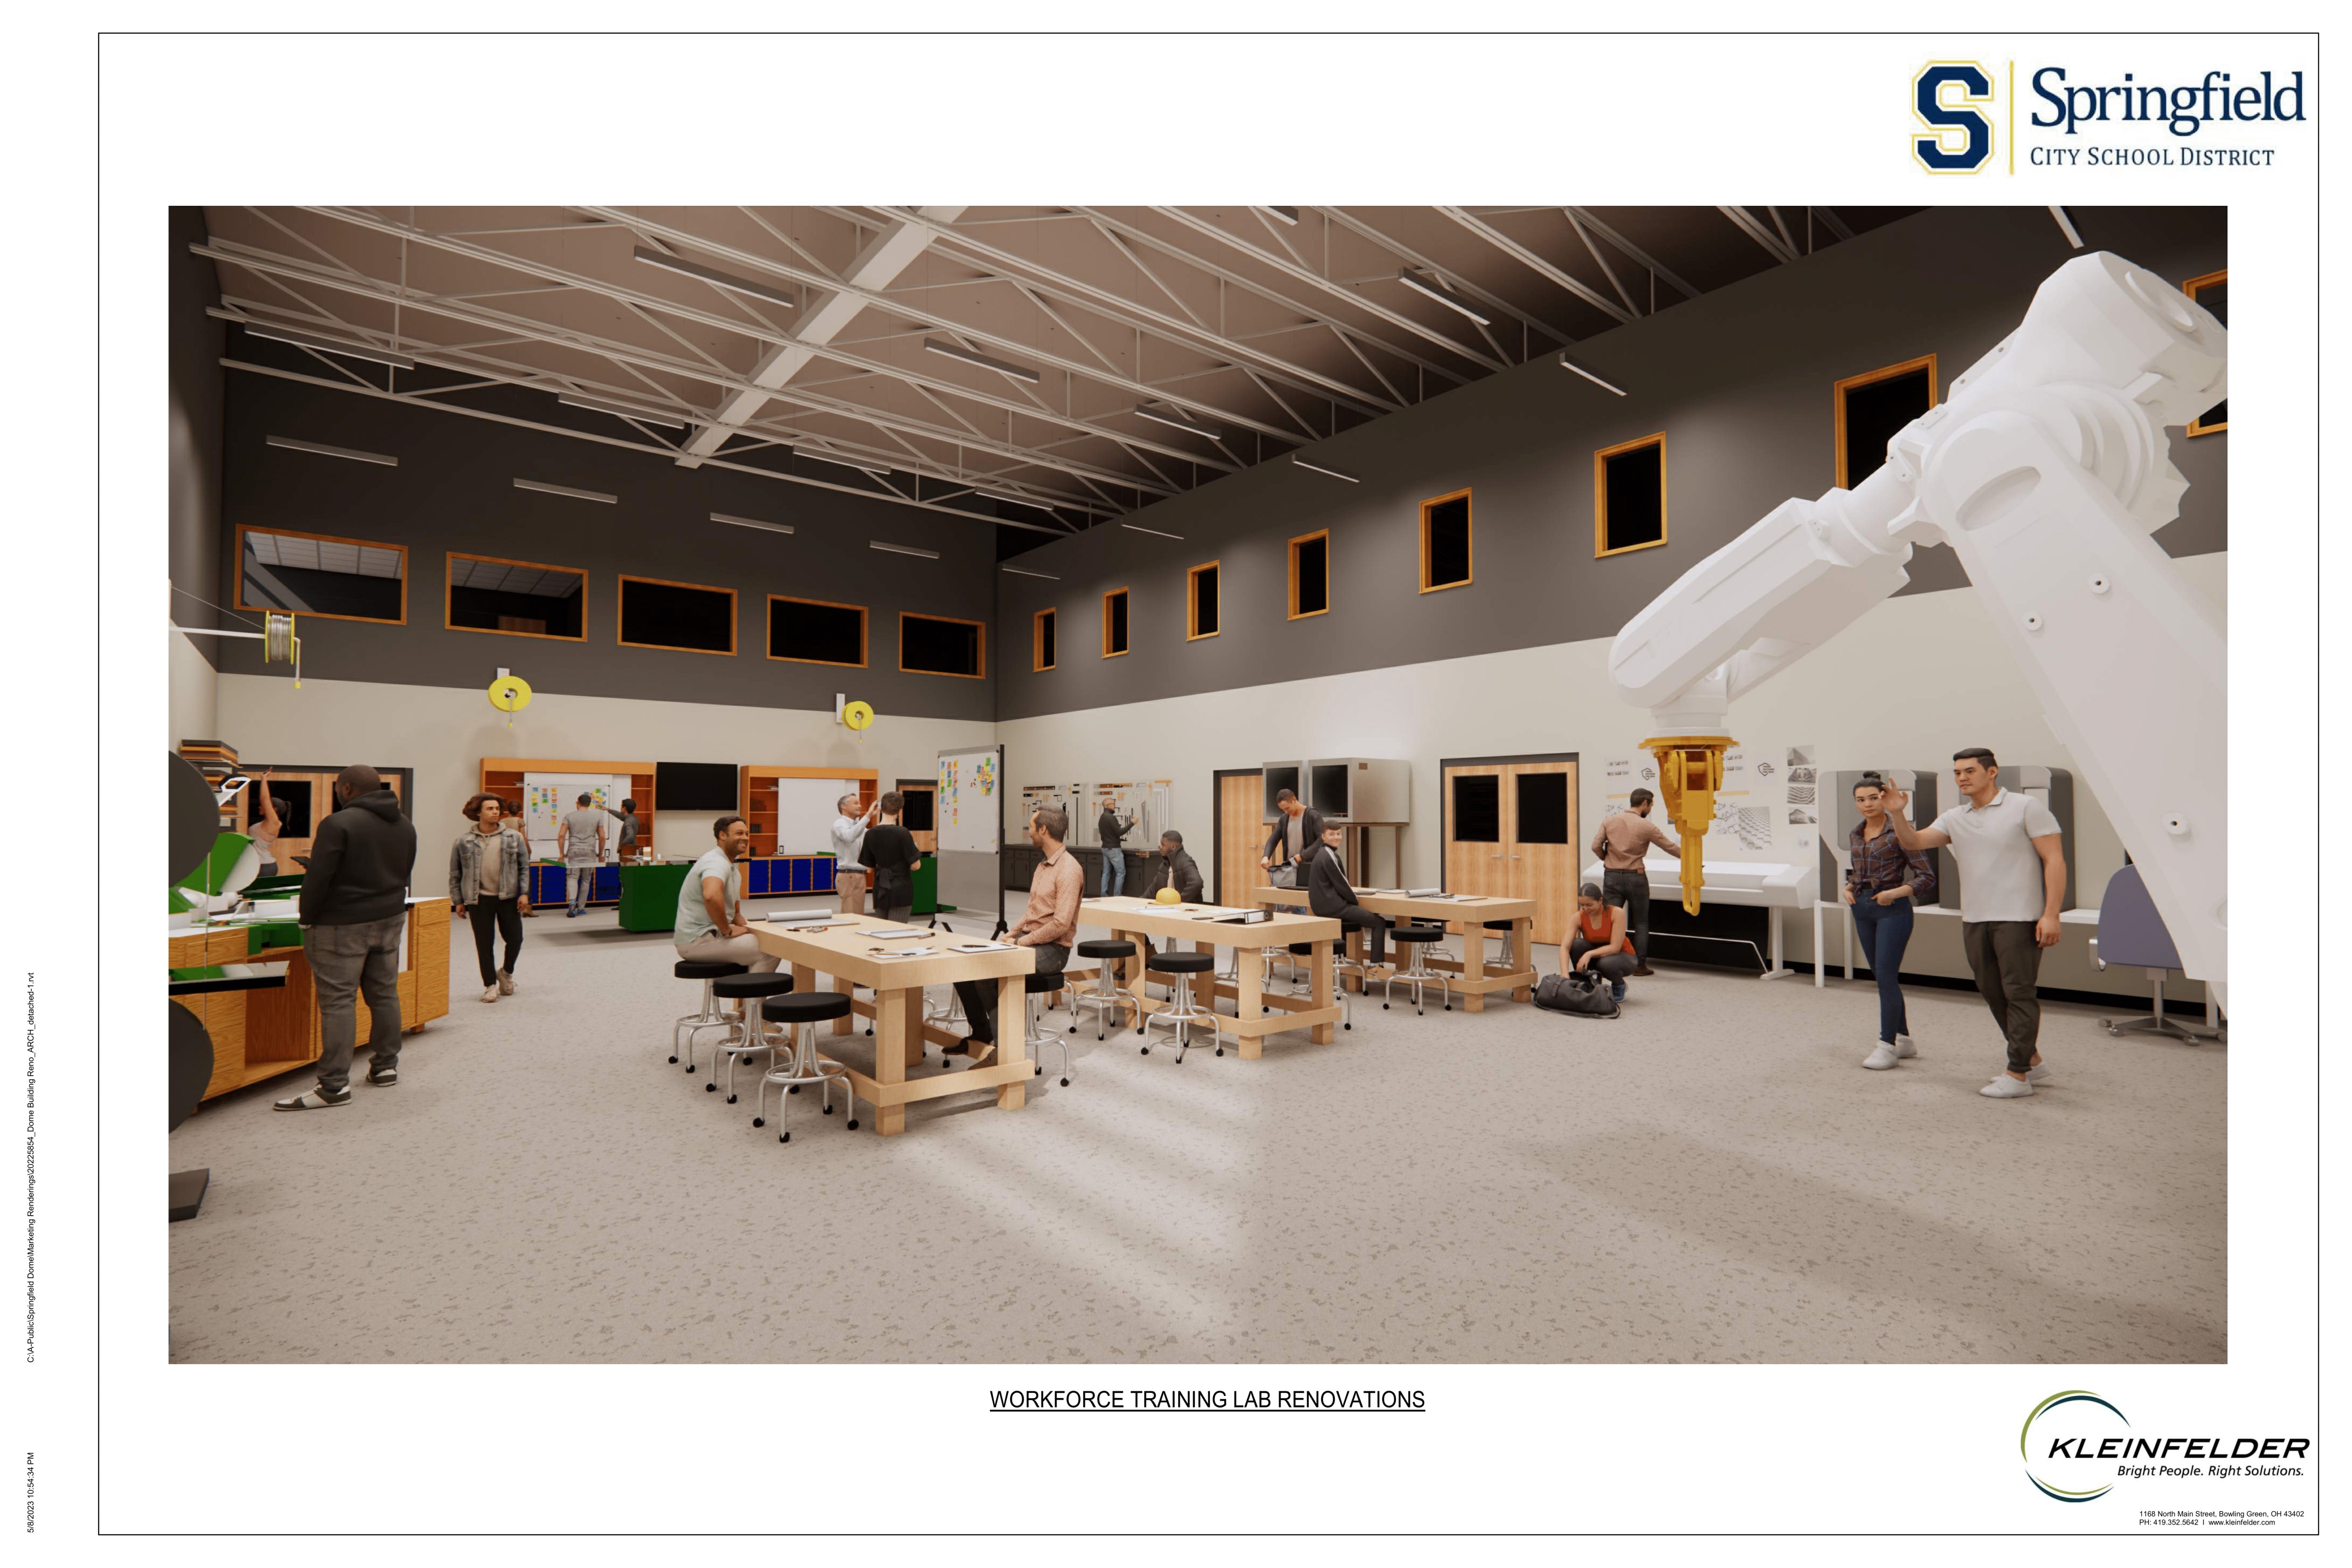 This image shows the space that will be the workforce training lab inside the Dome